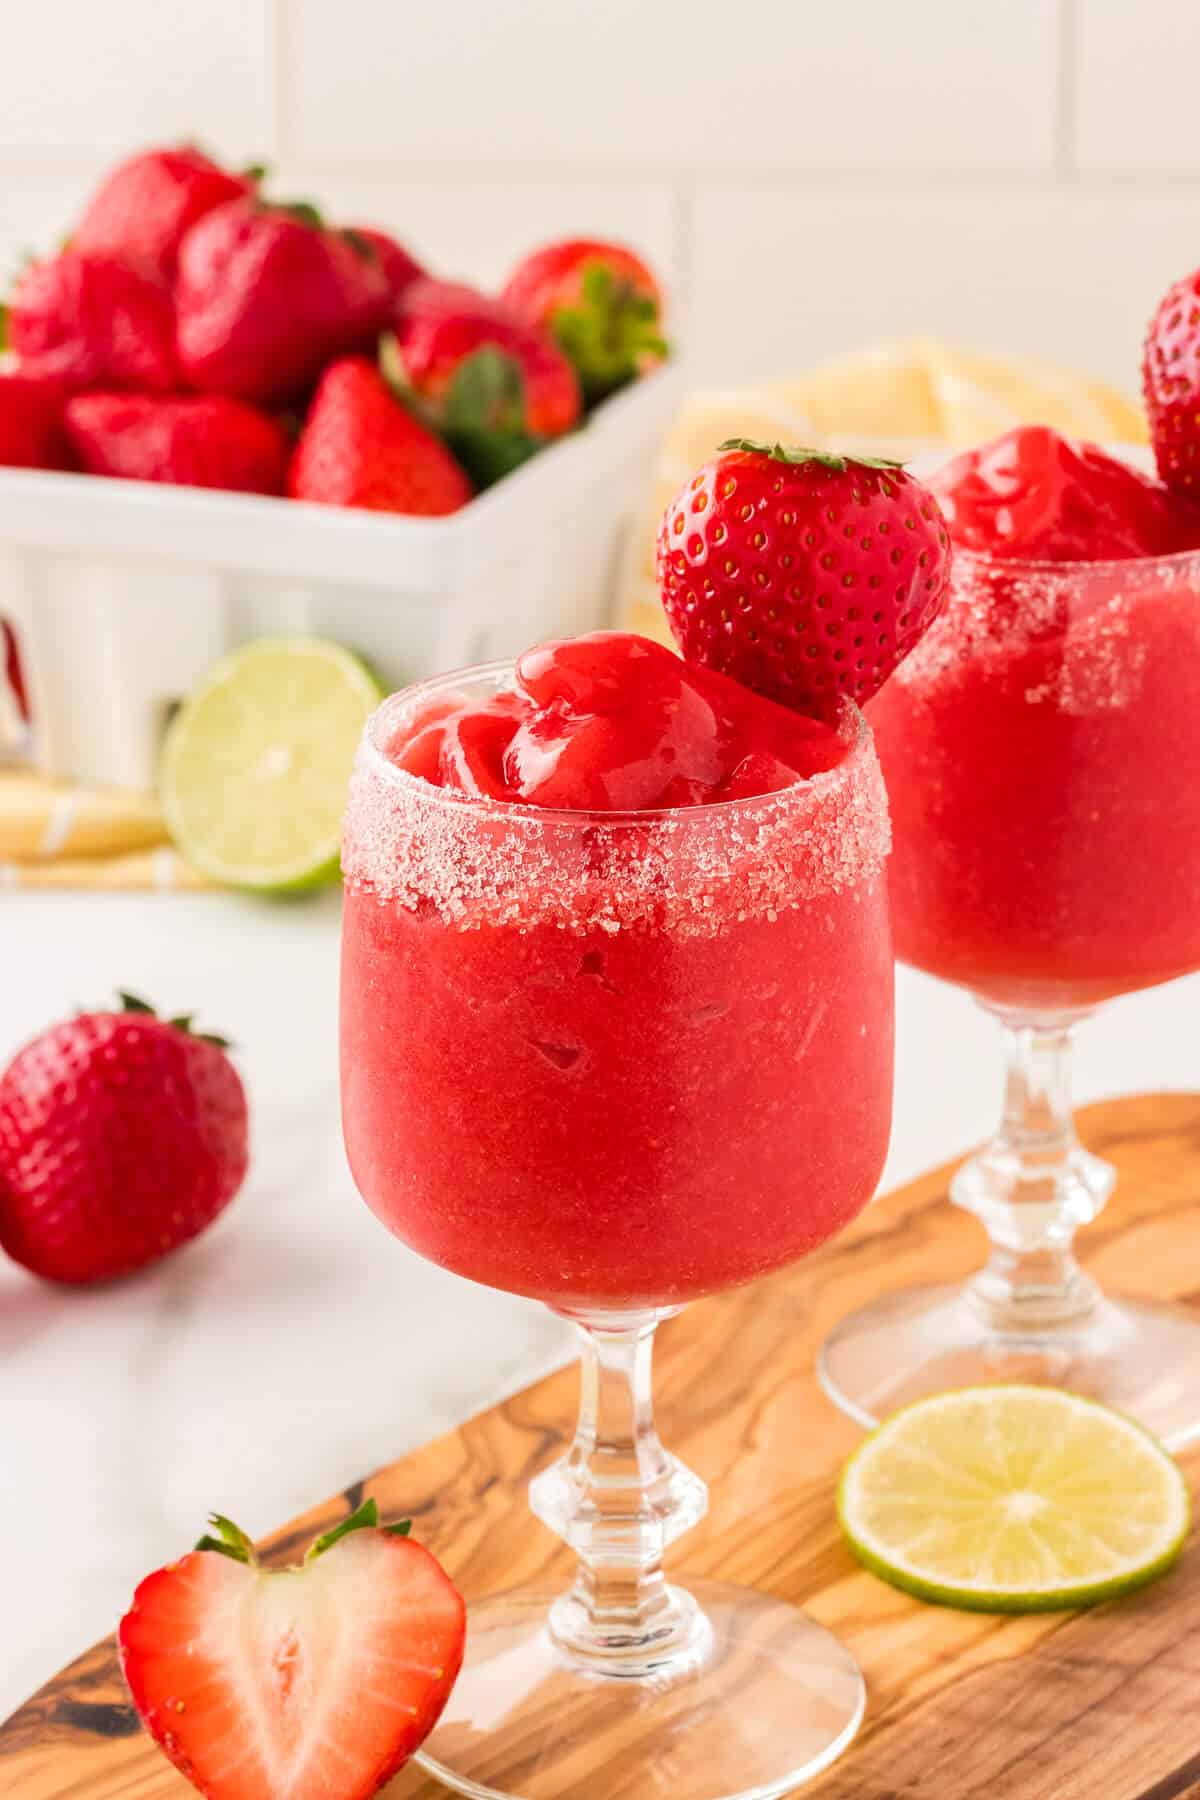 Virgin strawberry daiquiris in a sugar rimmed glass, garnished with a strawberry. A quart of strawberries is in the background, and there are a few strawberries and lime wheels scattered.